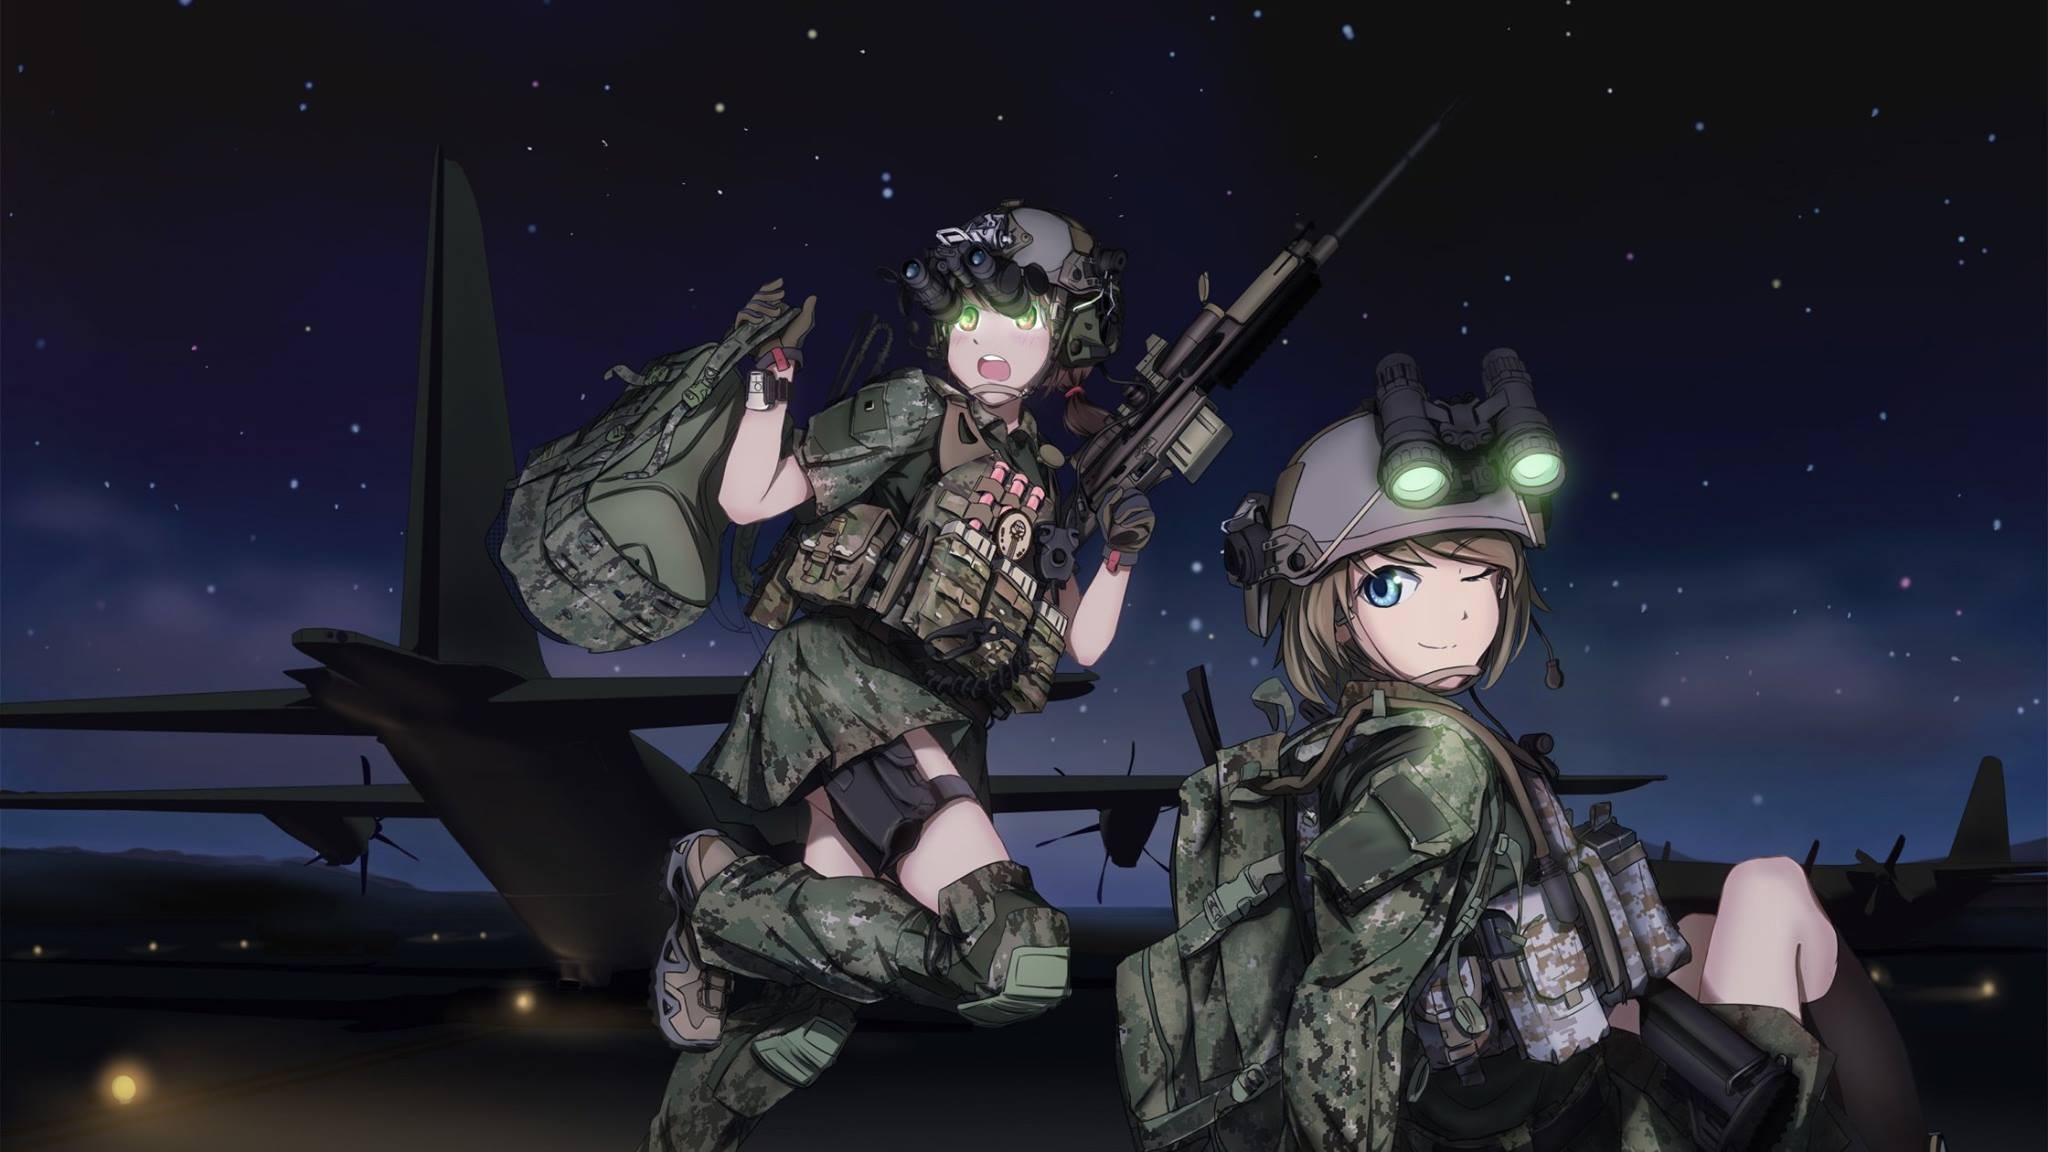 Night Soldier Night Vision Goggles Weapon Anime Girls 2048x1152